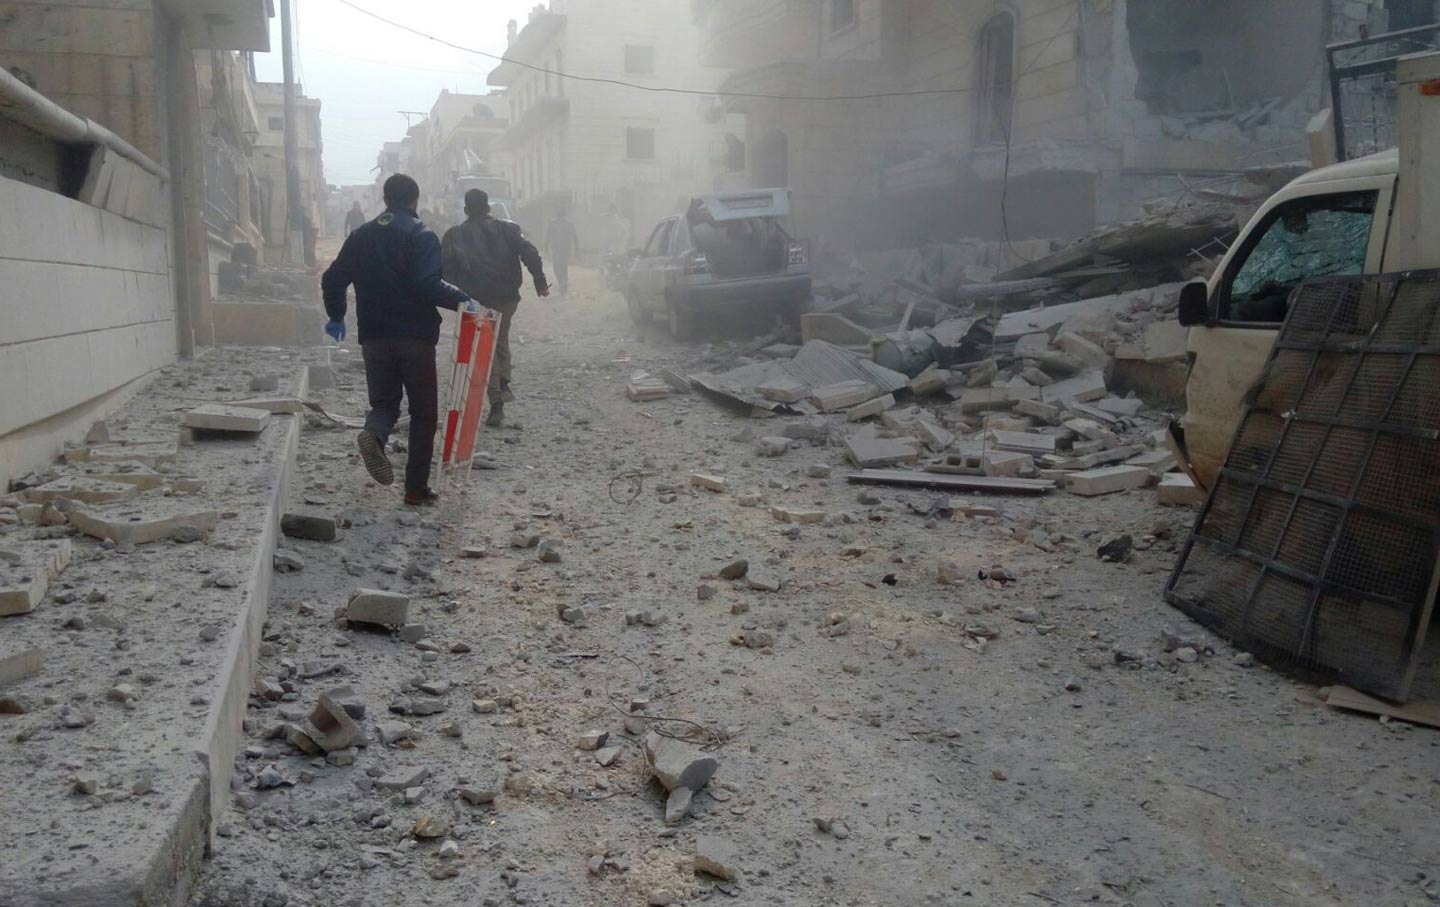 Syrian Government Offensive, Aided by Intensive Russian Bombing, Directly Targets Civilian Infrastructure